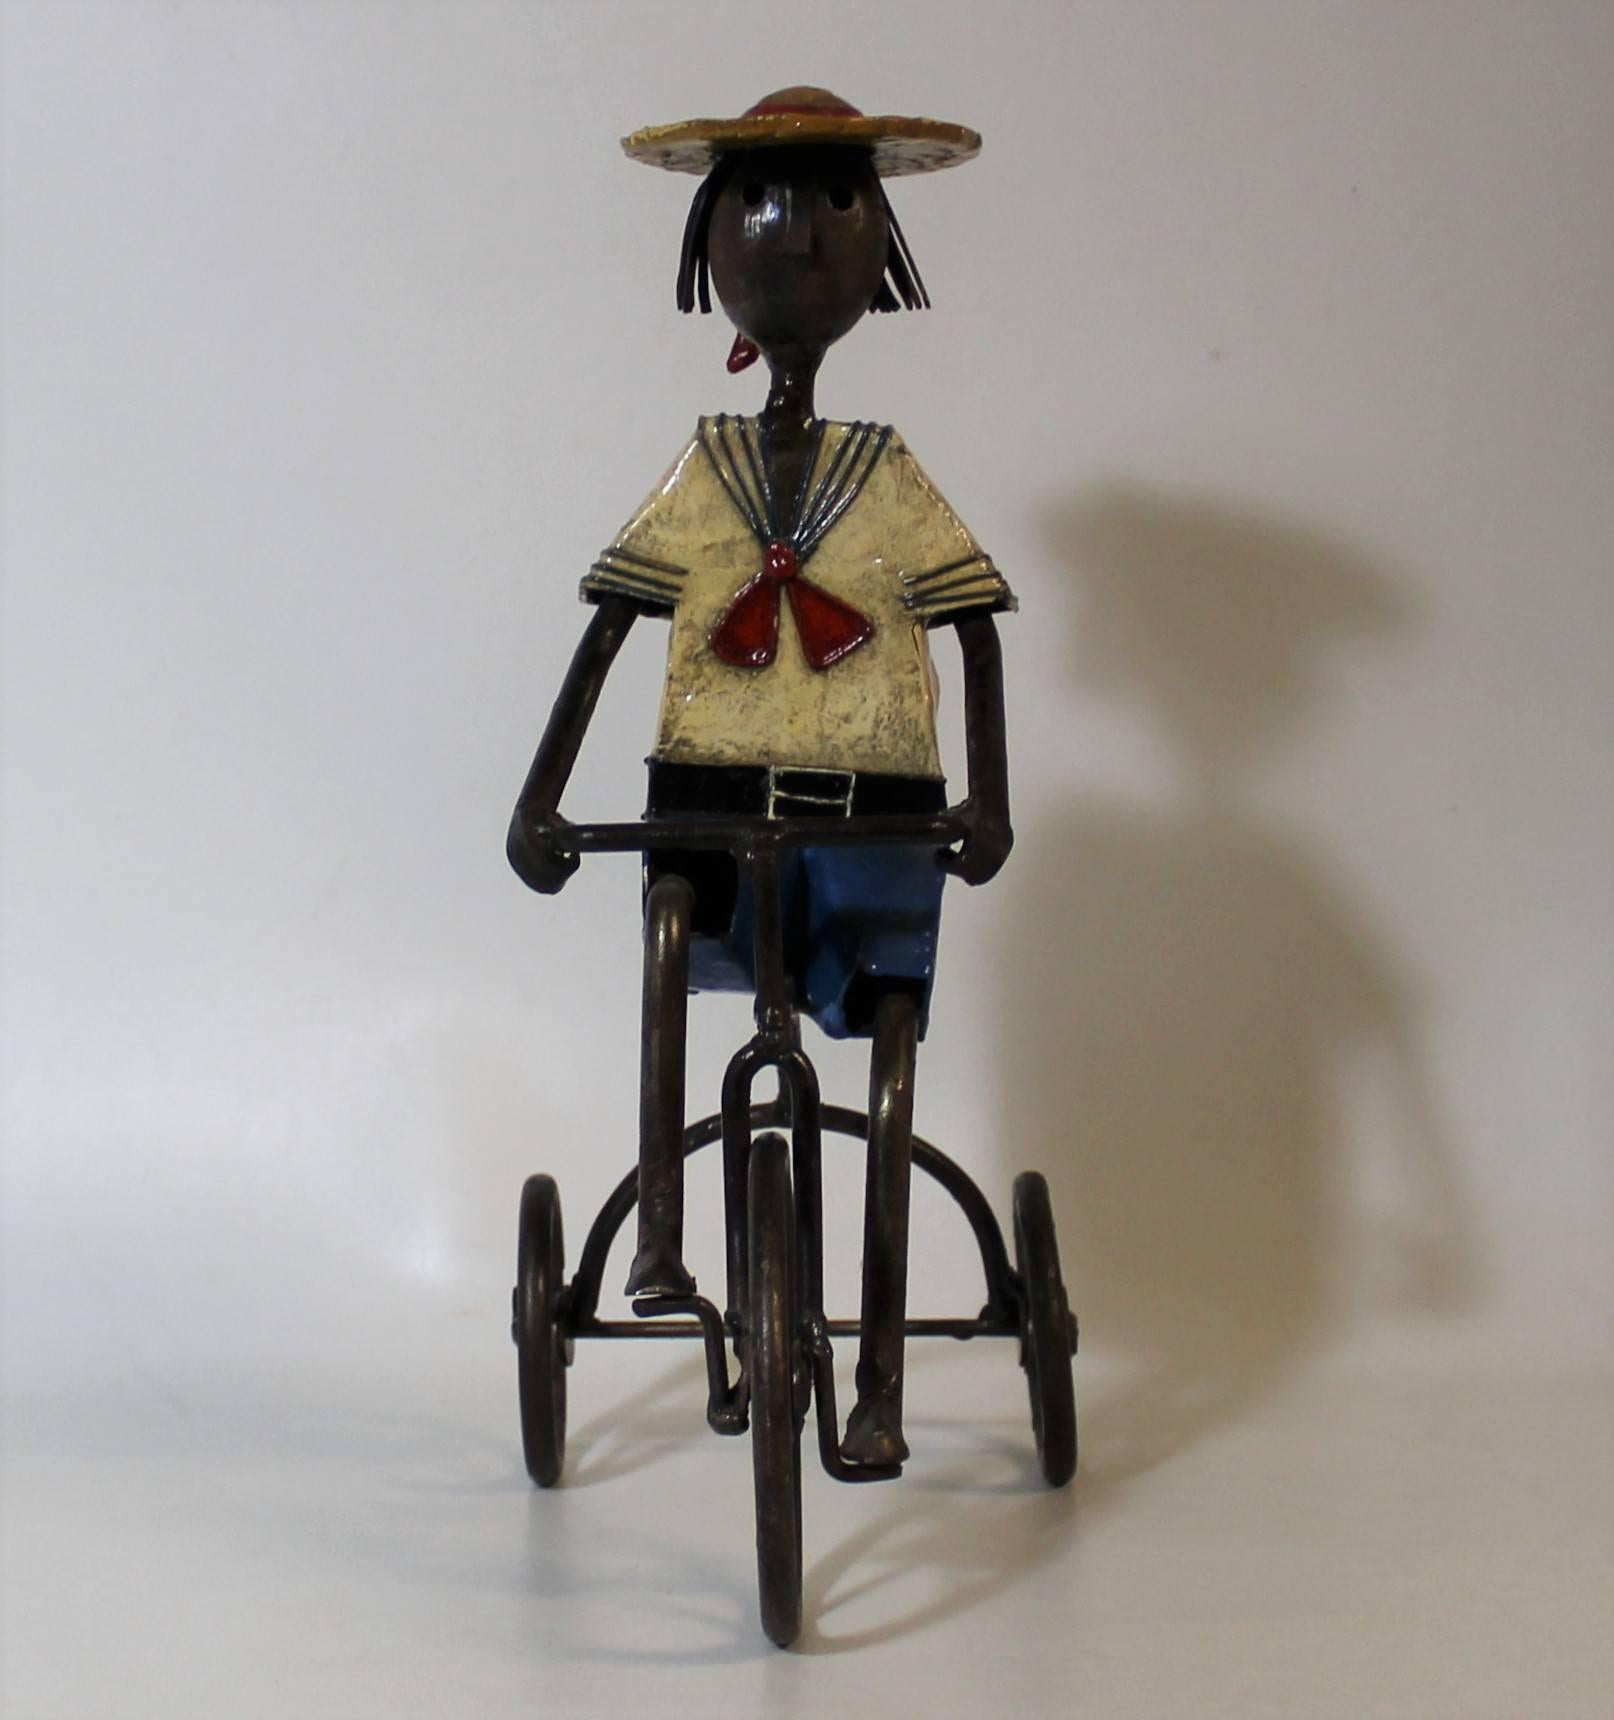 Whimsical metal and papier mâché sculpture of a boy on a tricycle by Mexican artist Manuel Felguerez.